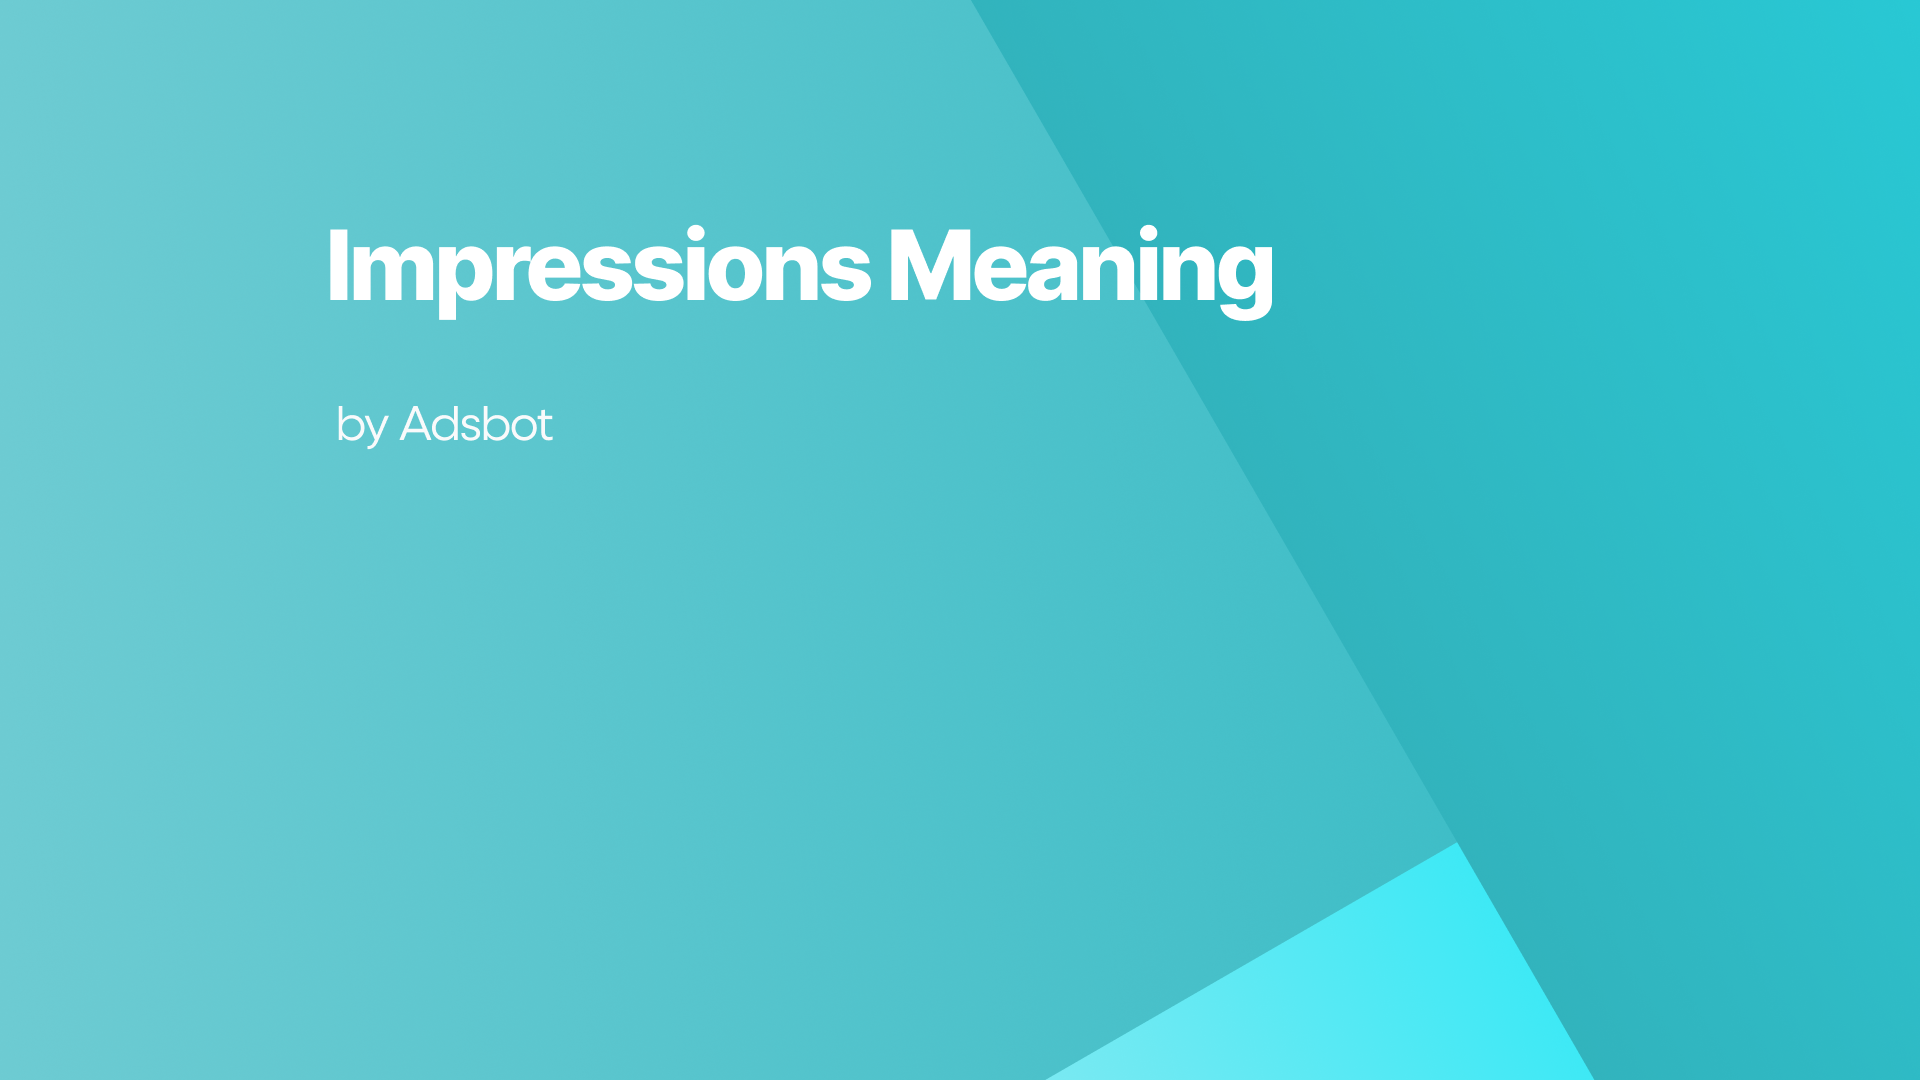 Impressions Meaning